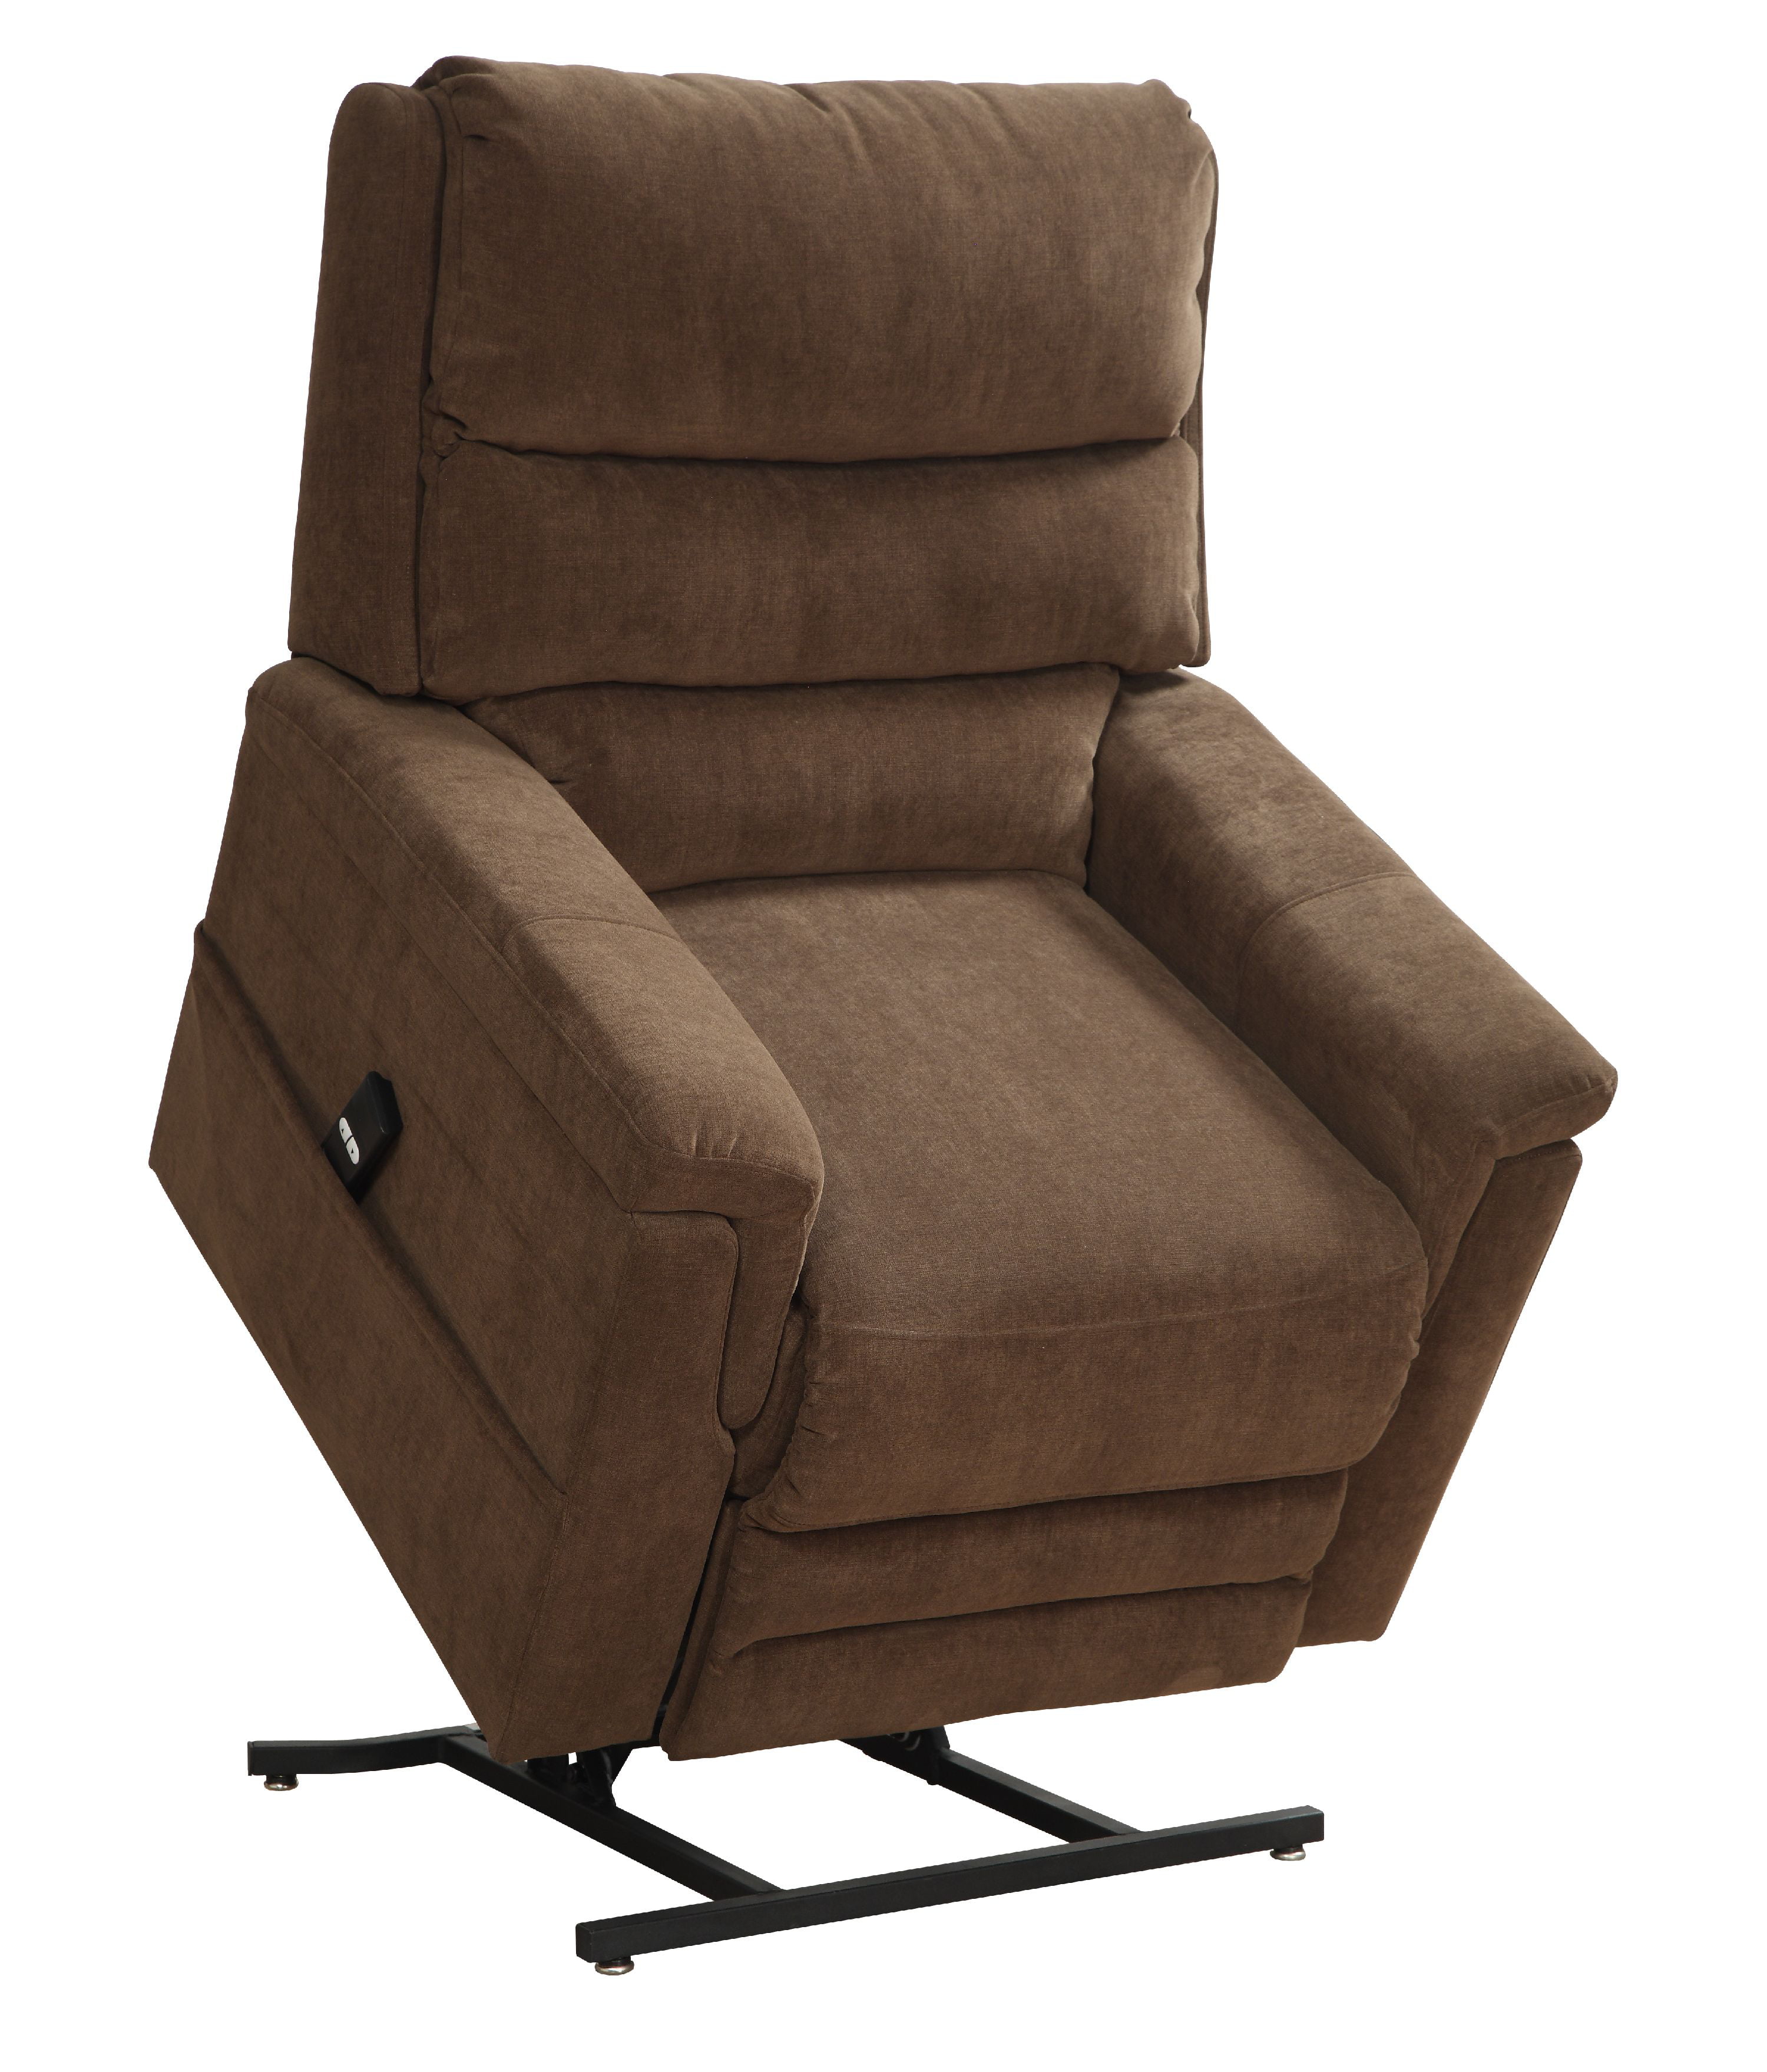 luna upholstered power recliner lift chair in coffee brown